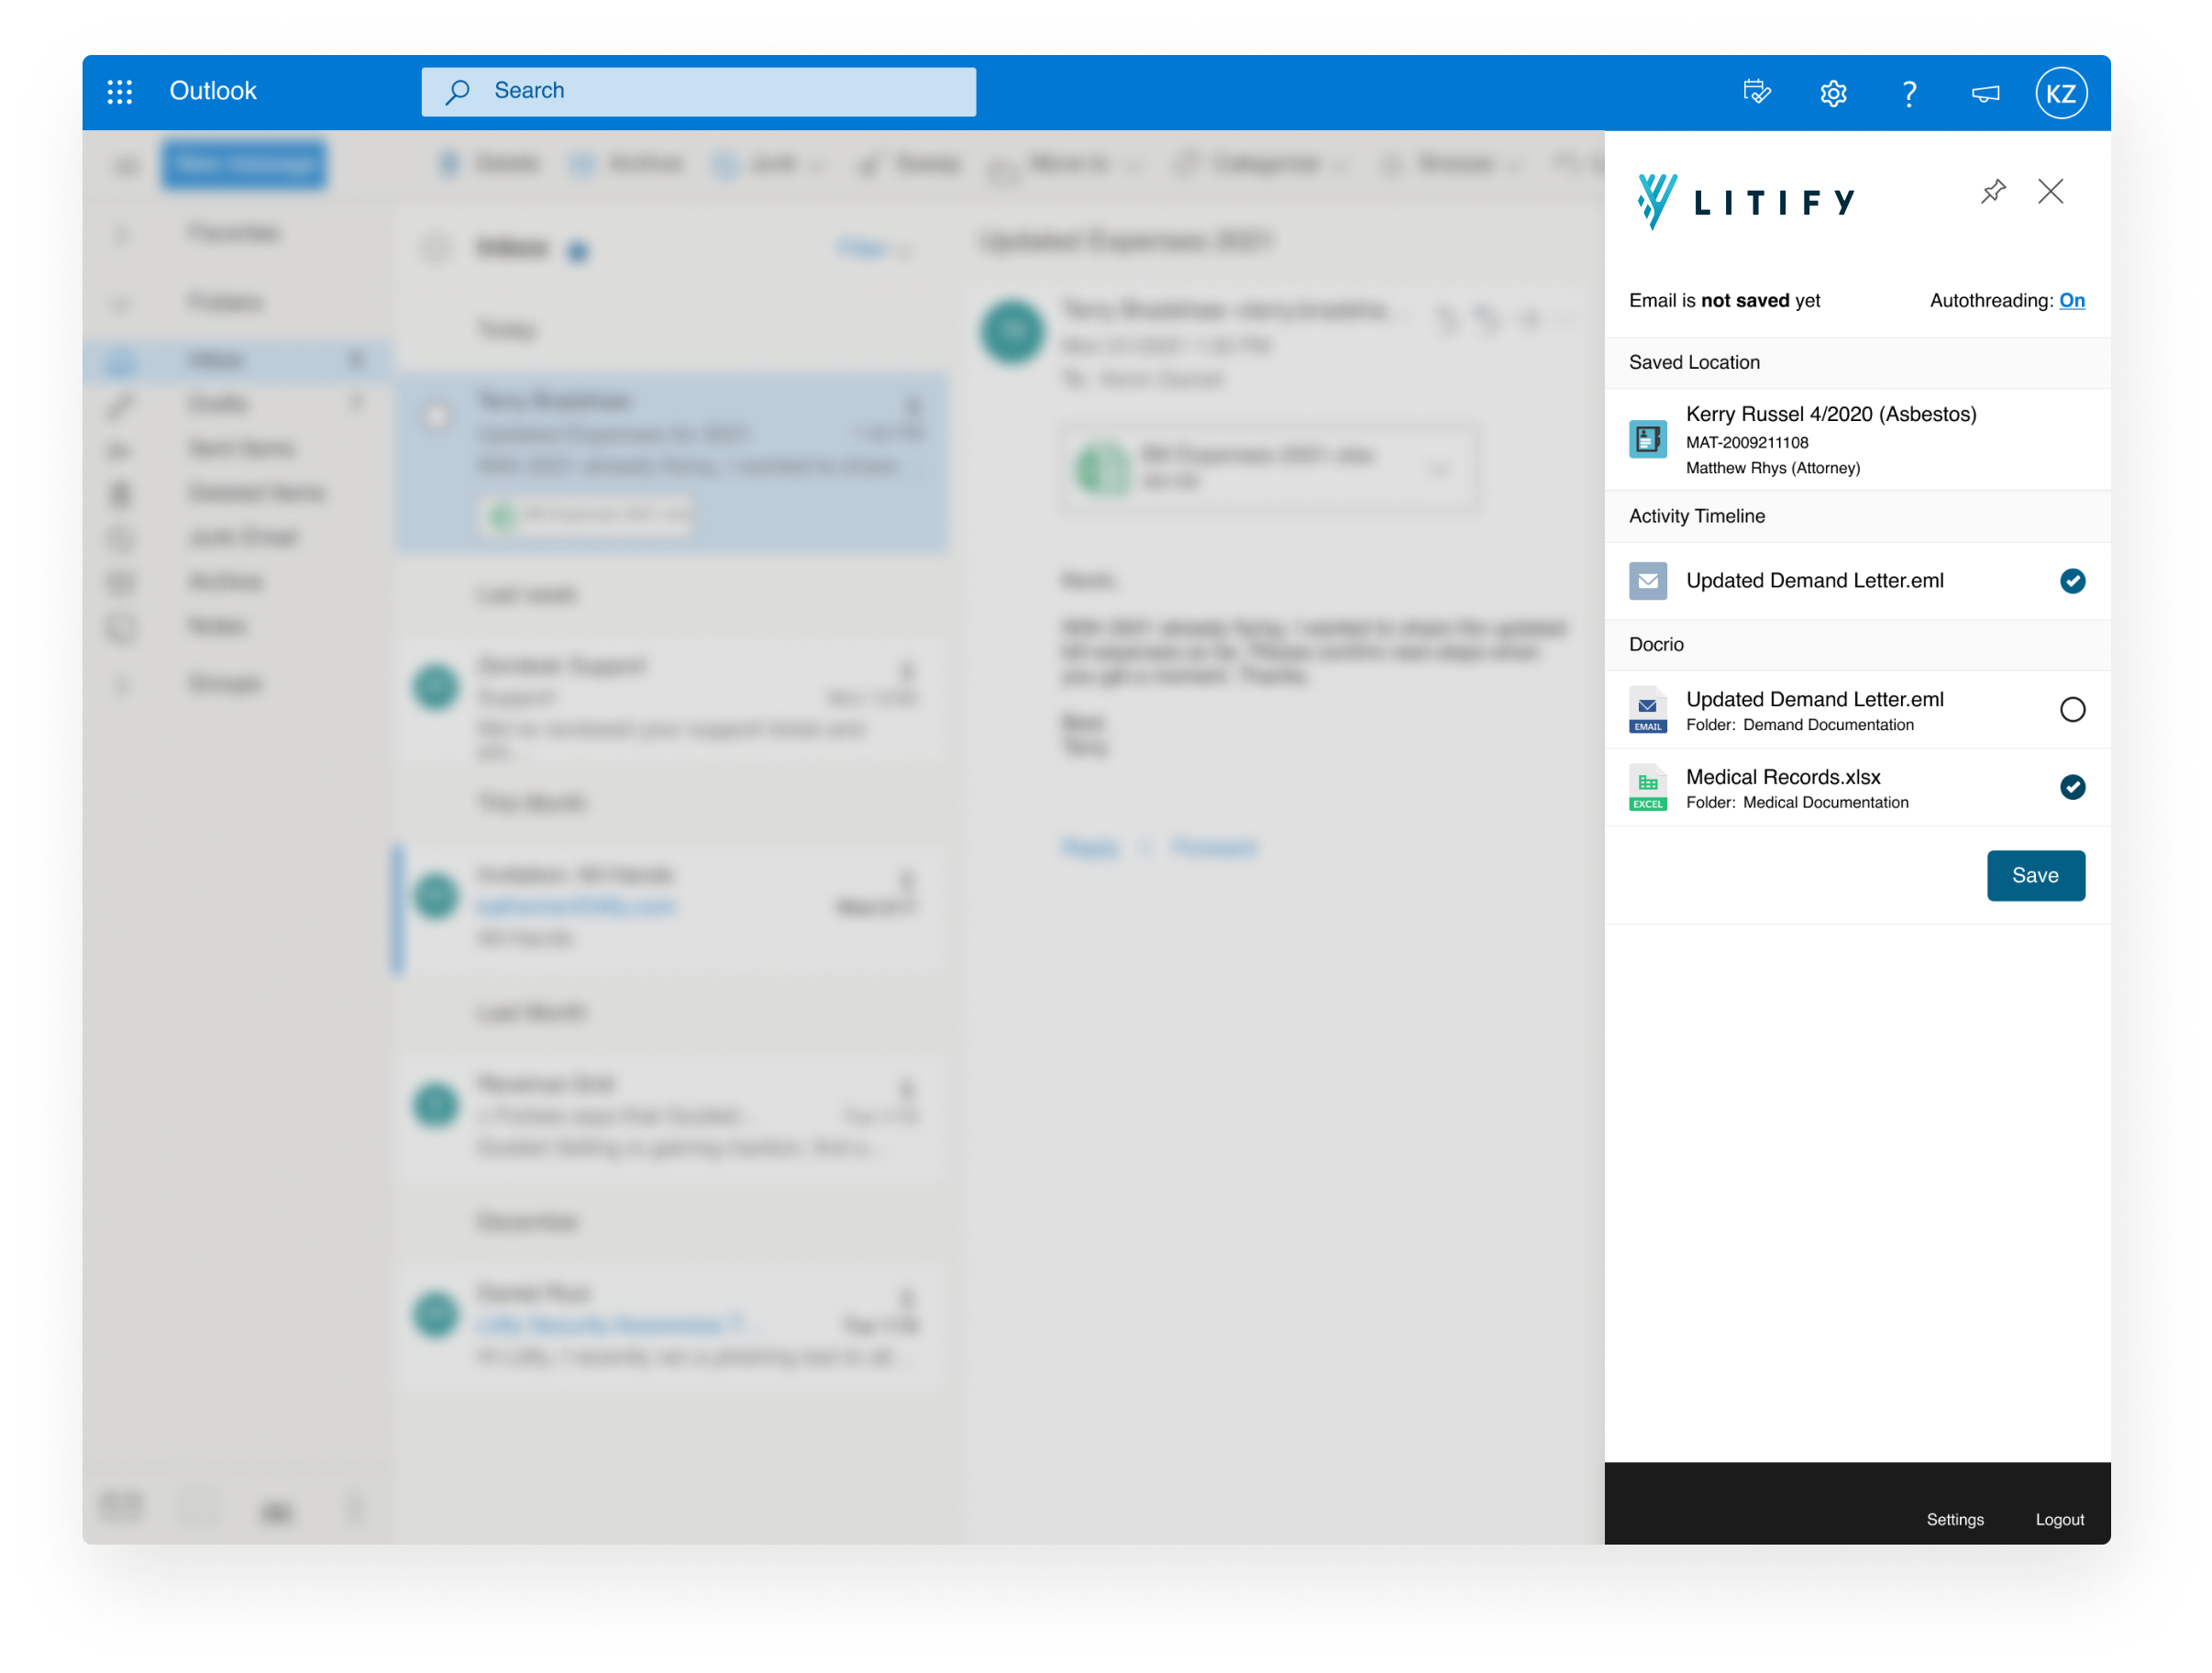 Manage Documents via Email: Save files directly from Outlook to the matter plan with our Email feature.